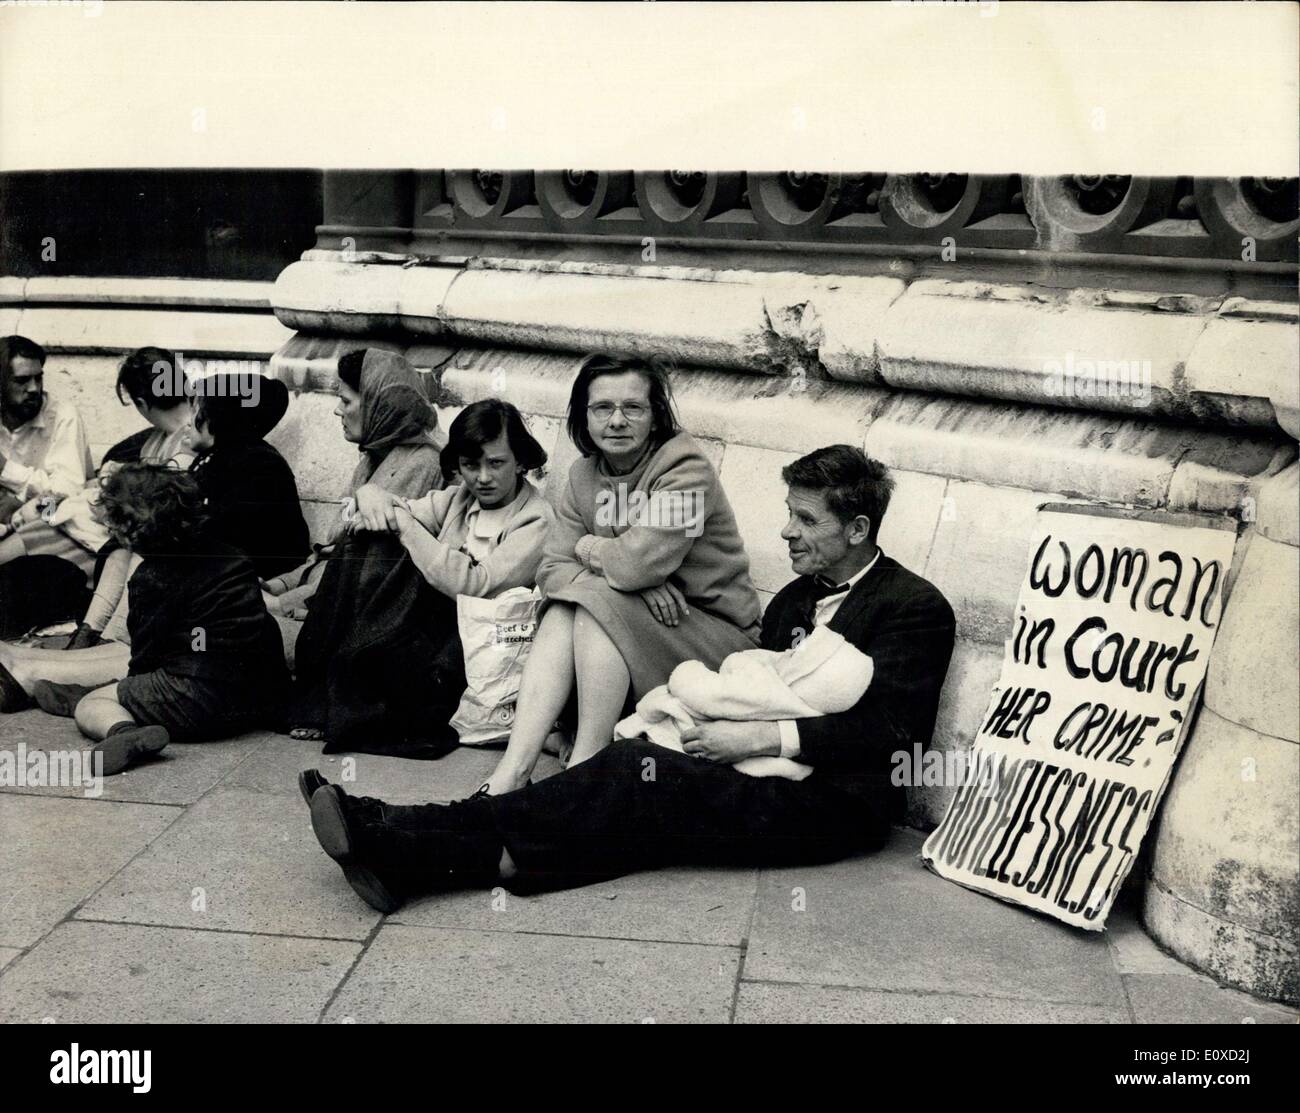 Apr. 25, 1966 - Protest Demonstration In London: A demonstration outside the Law Courts in London today, was staged by more than 200 women and children from the King Hill hostel for homeless families in West Malling, Kent. The demonstrators sat on the pavement as the High Court began considering an eviction section brought by Kent County Council against one of the residents, Mrs. Jean Daniels. The demonstration was organized by the ''Friends of King Hill'', and a spokesman said: ''We are protesting against the eviction order. This is a test case and if the council wins and Mrs Stock Photo